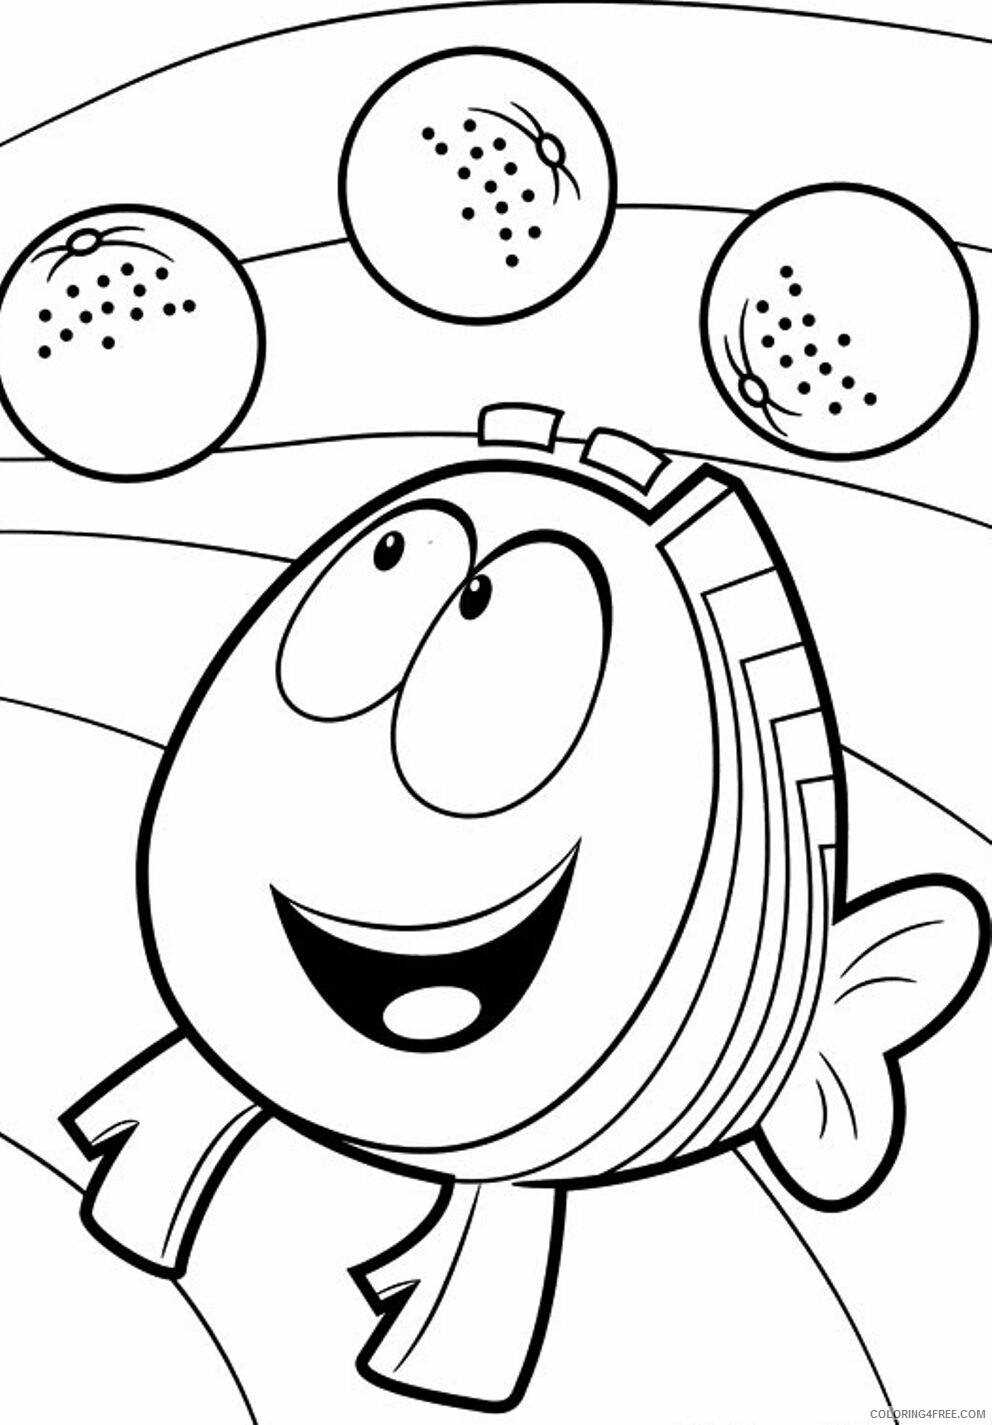 Bubble Guppies Coloring Pages TV Film Free Bubble Guppies 2 Printable 2020 01660 Coloring4free